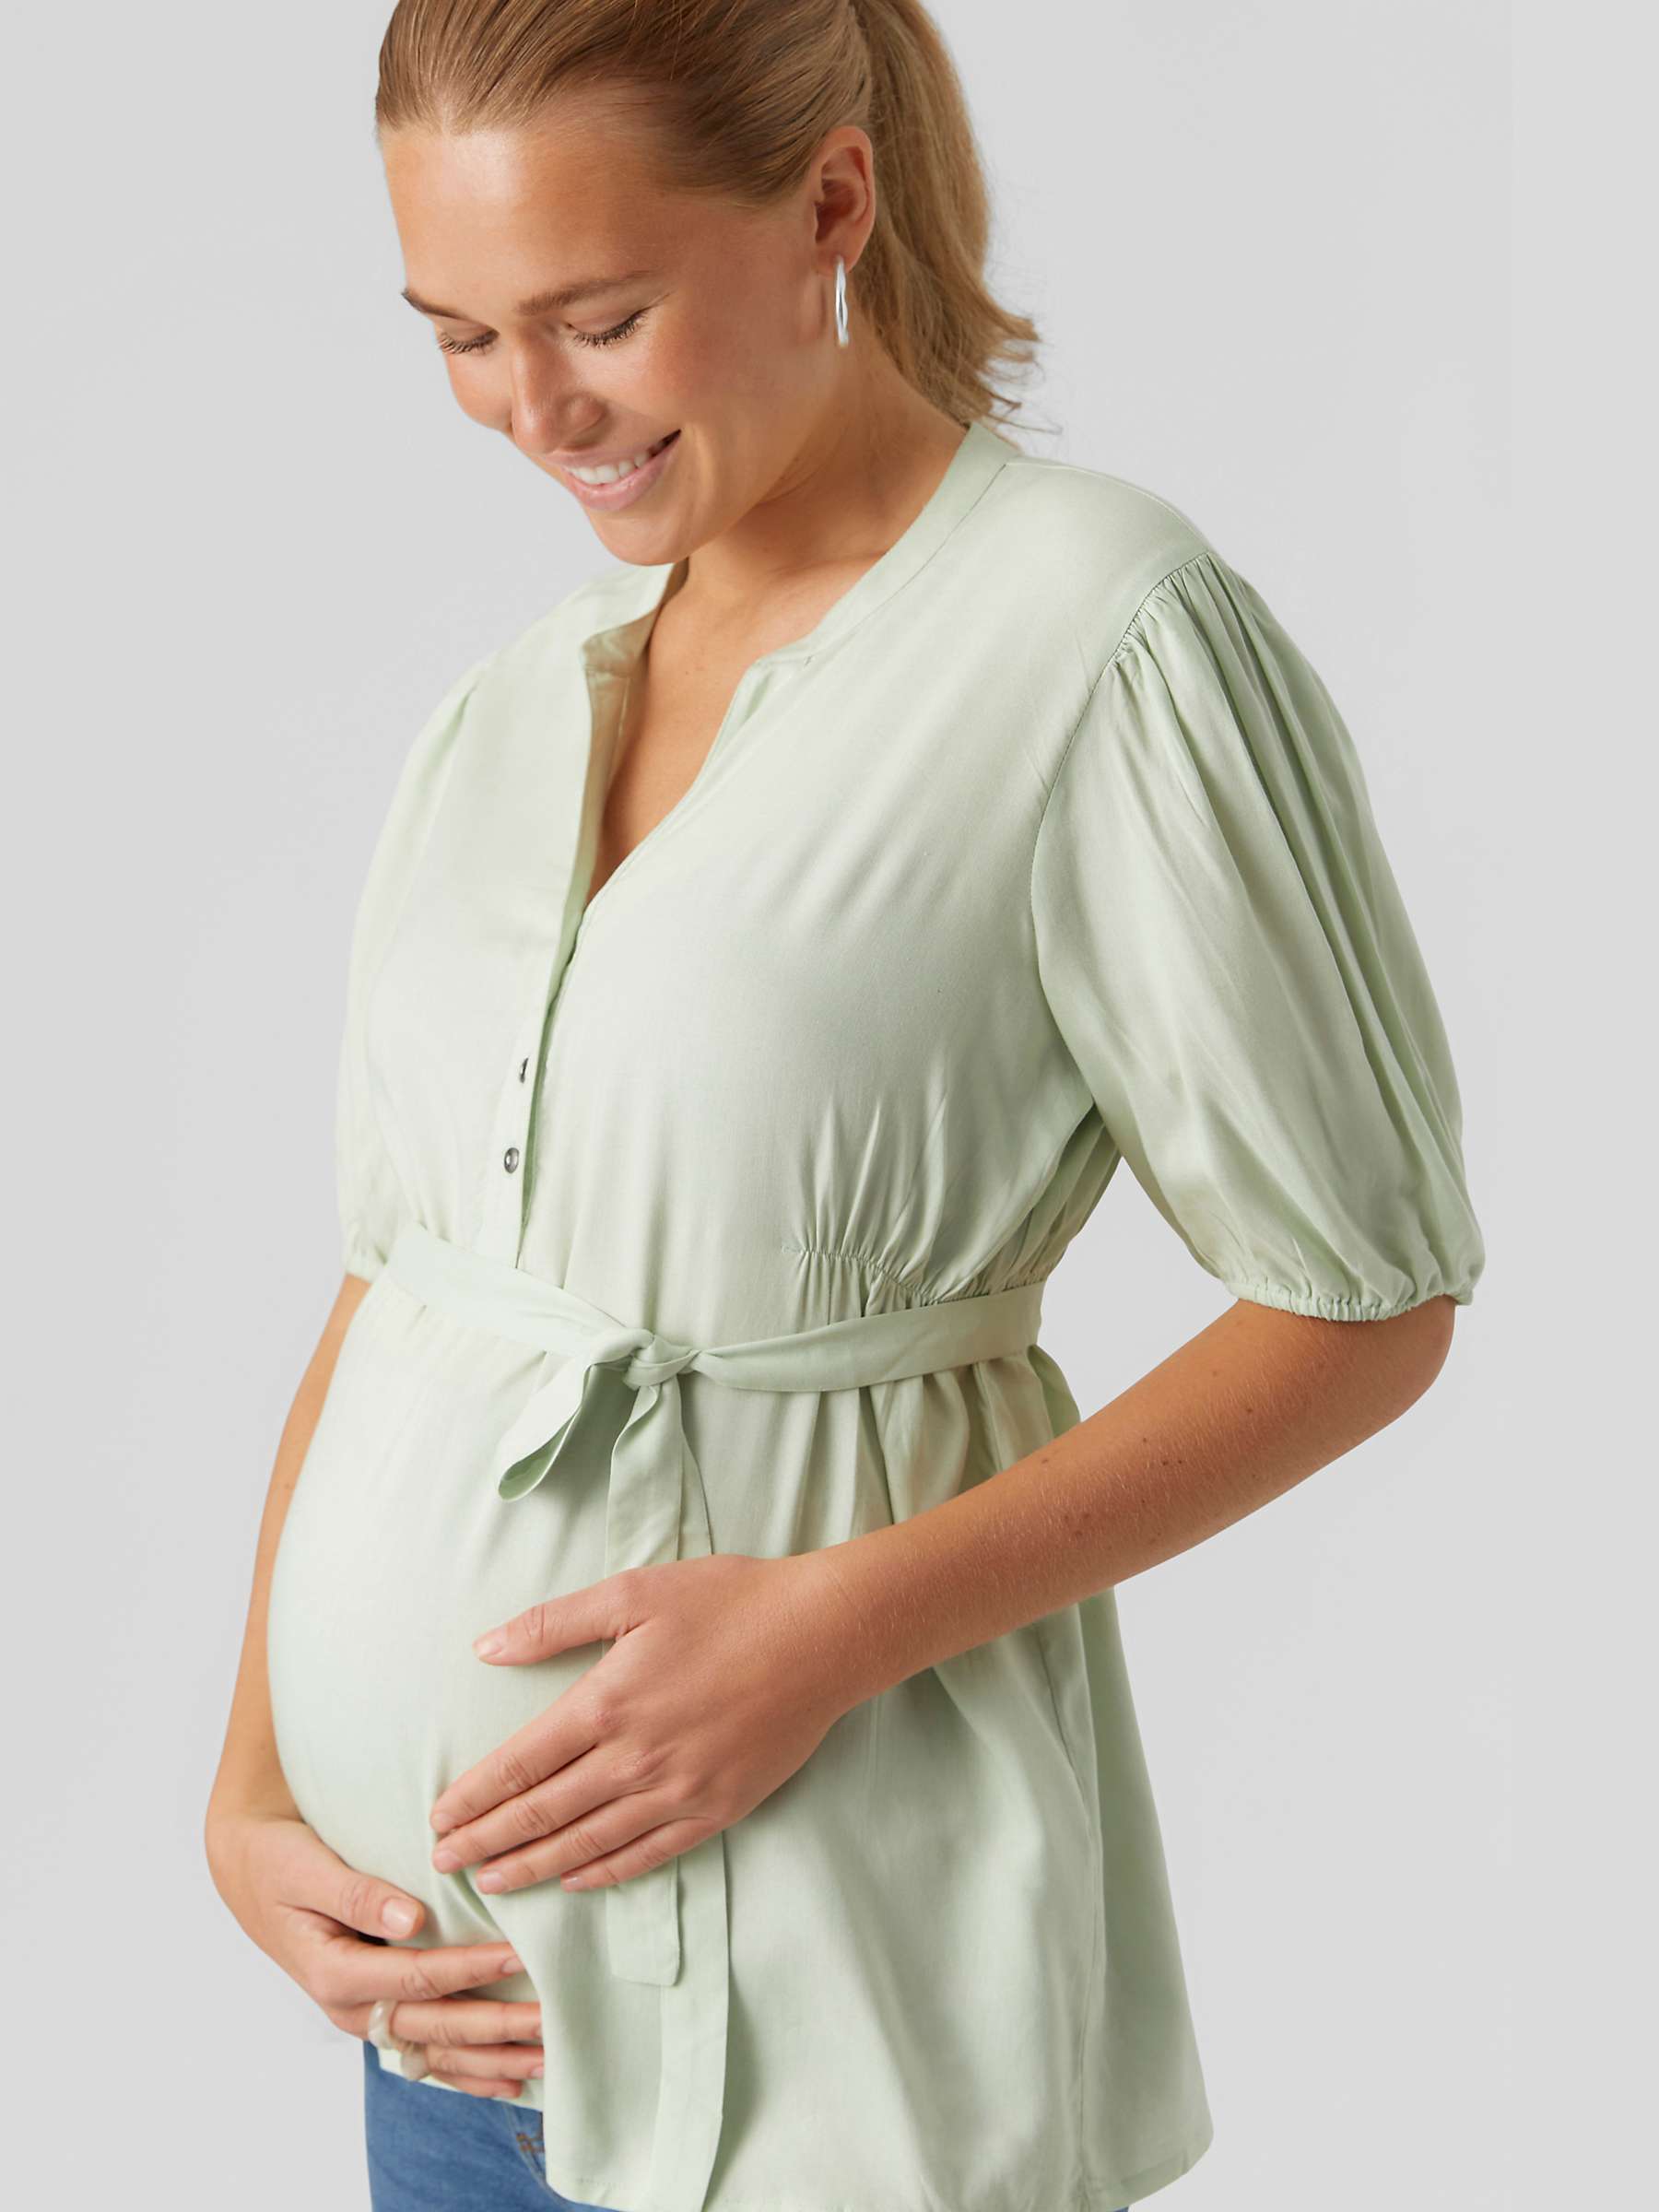 Buy Mamalicious Mercy Lia Maternity Top, Smoke Green Online at johnlewis.com